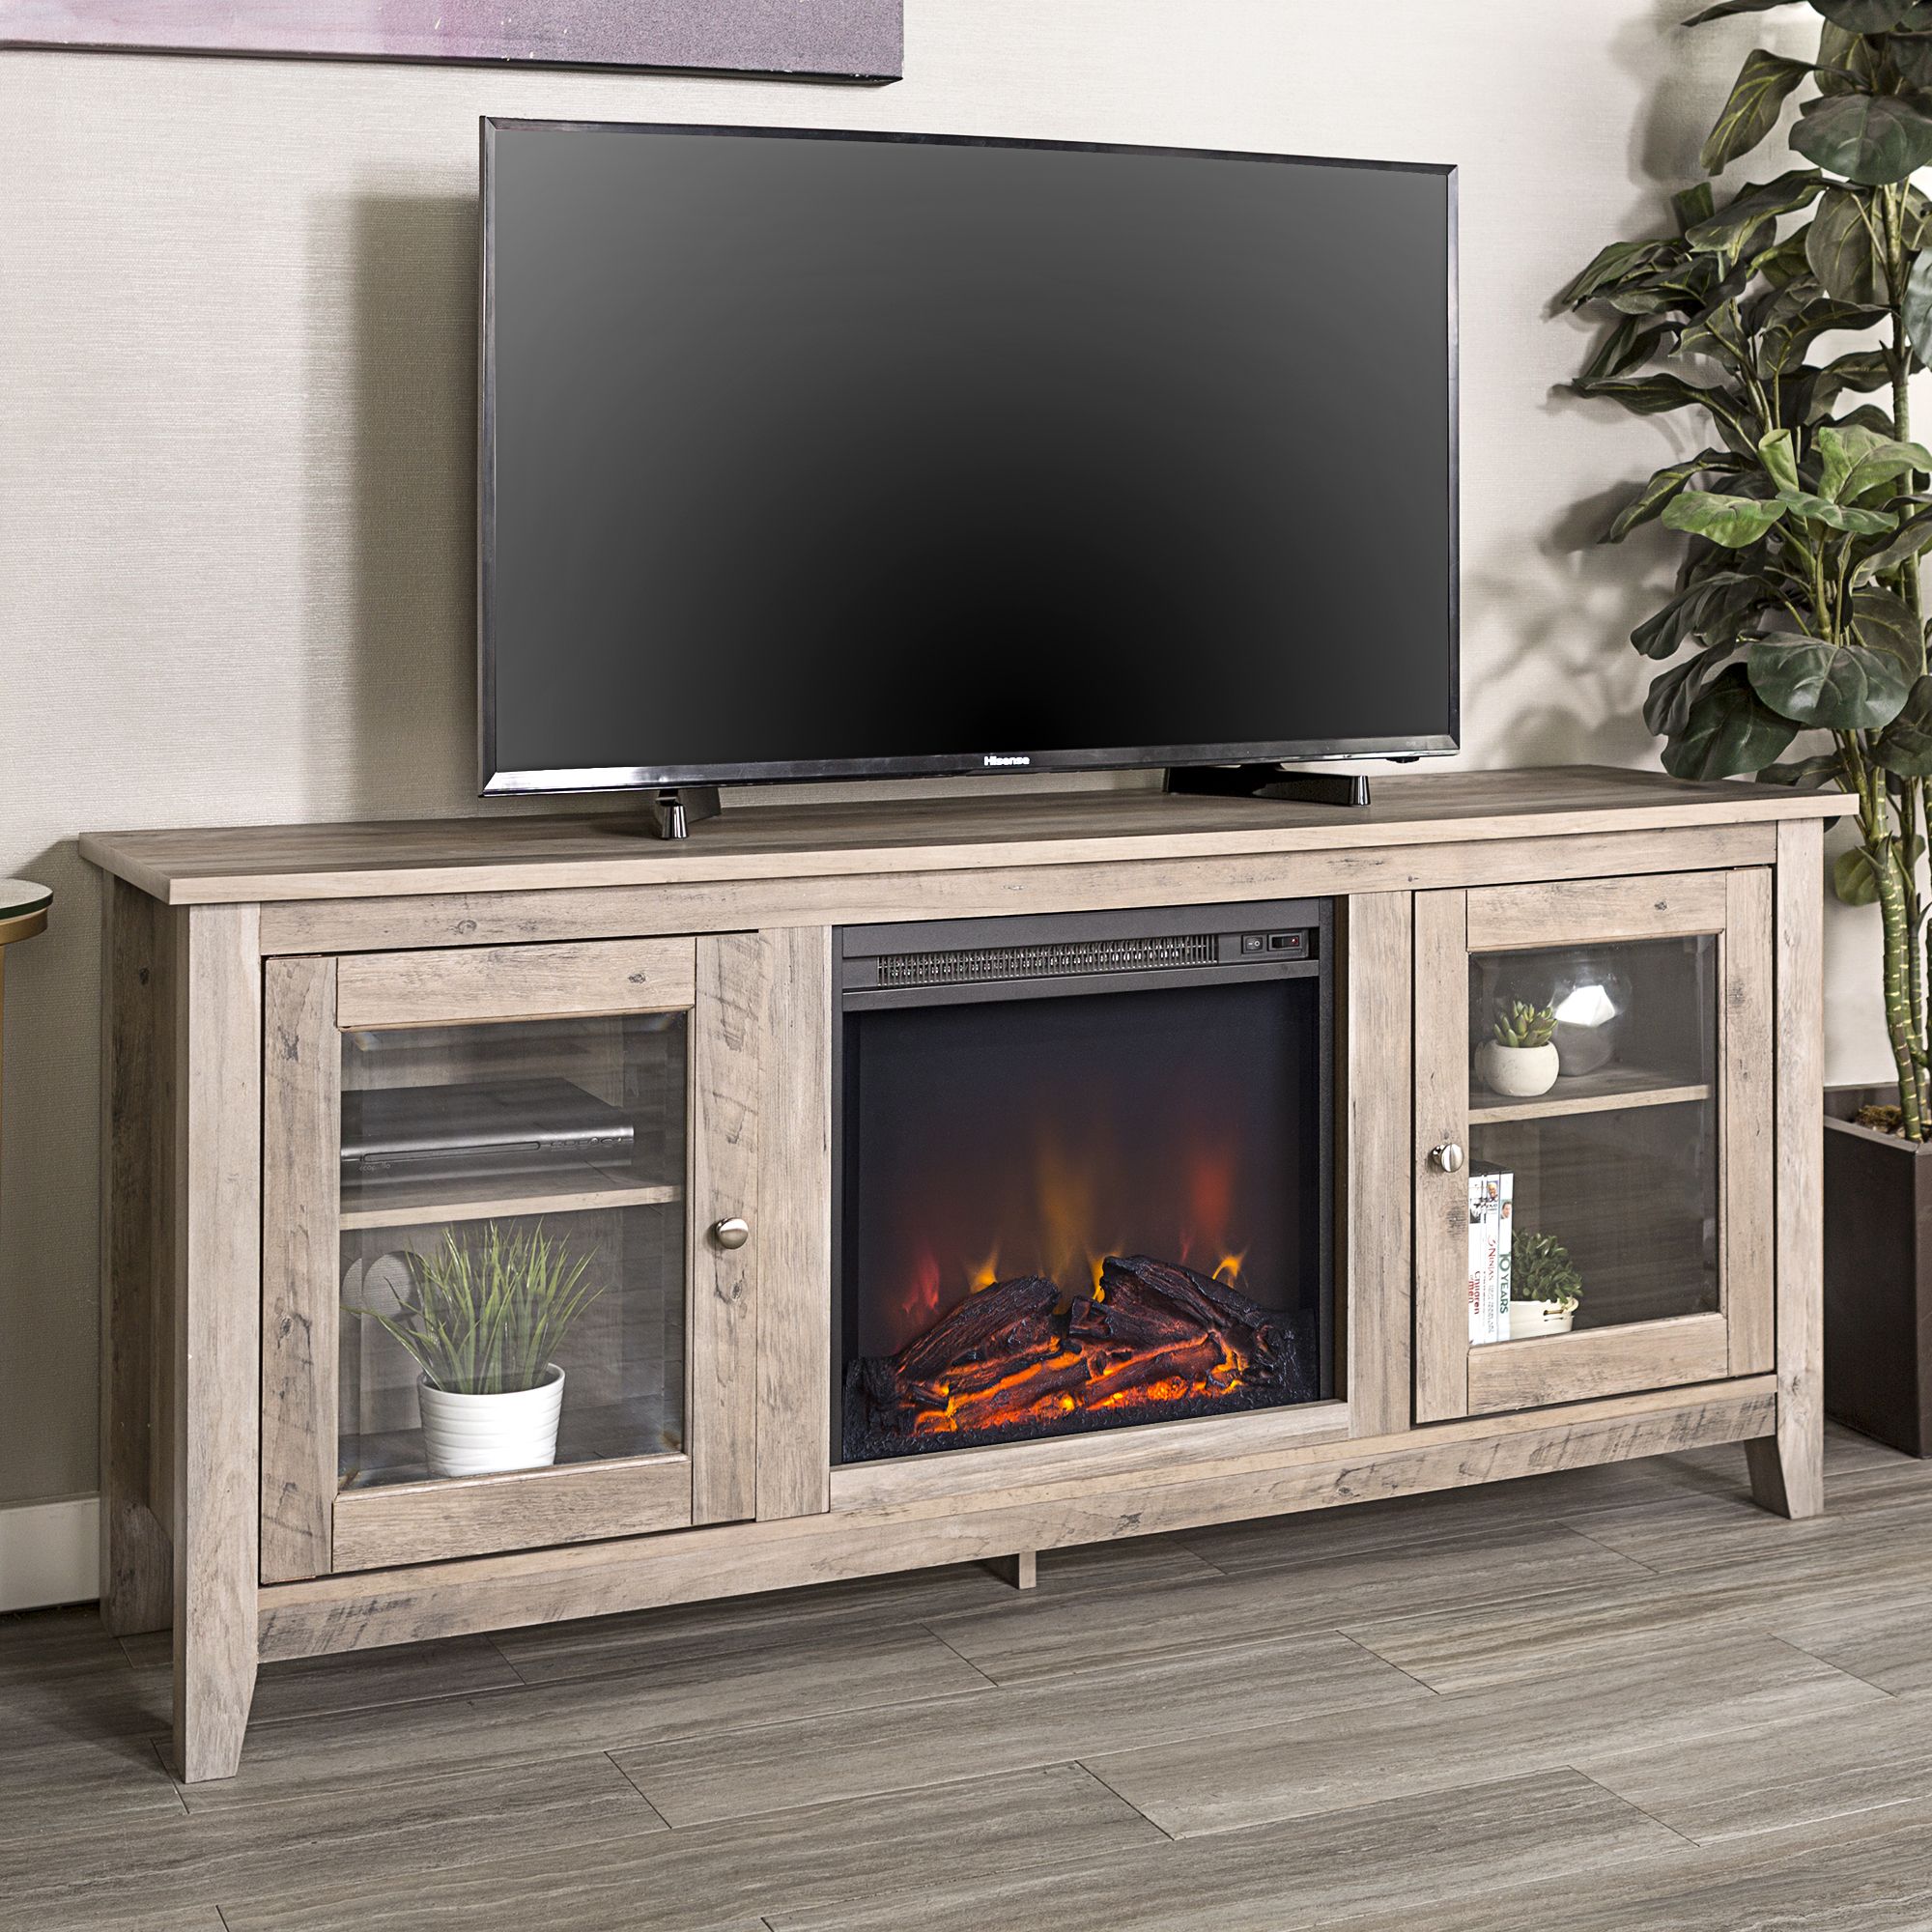 Walkeredison Furniture 58" Wood Media Tv Stand Console Intended For Delphi Grey Tv Stands (View 7 of 15)